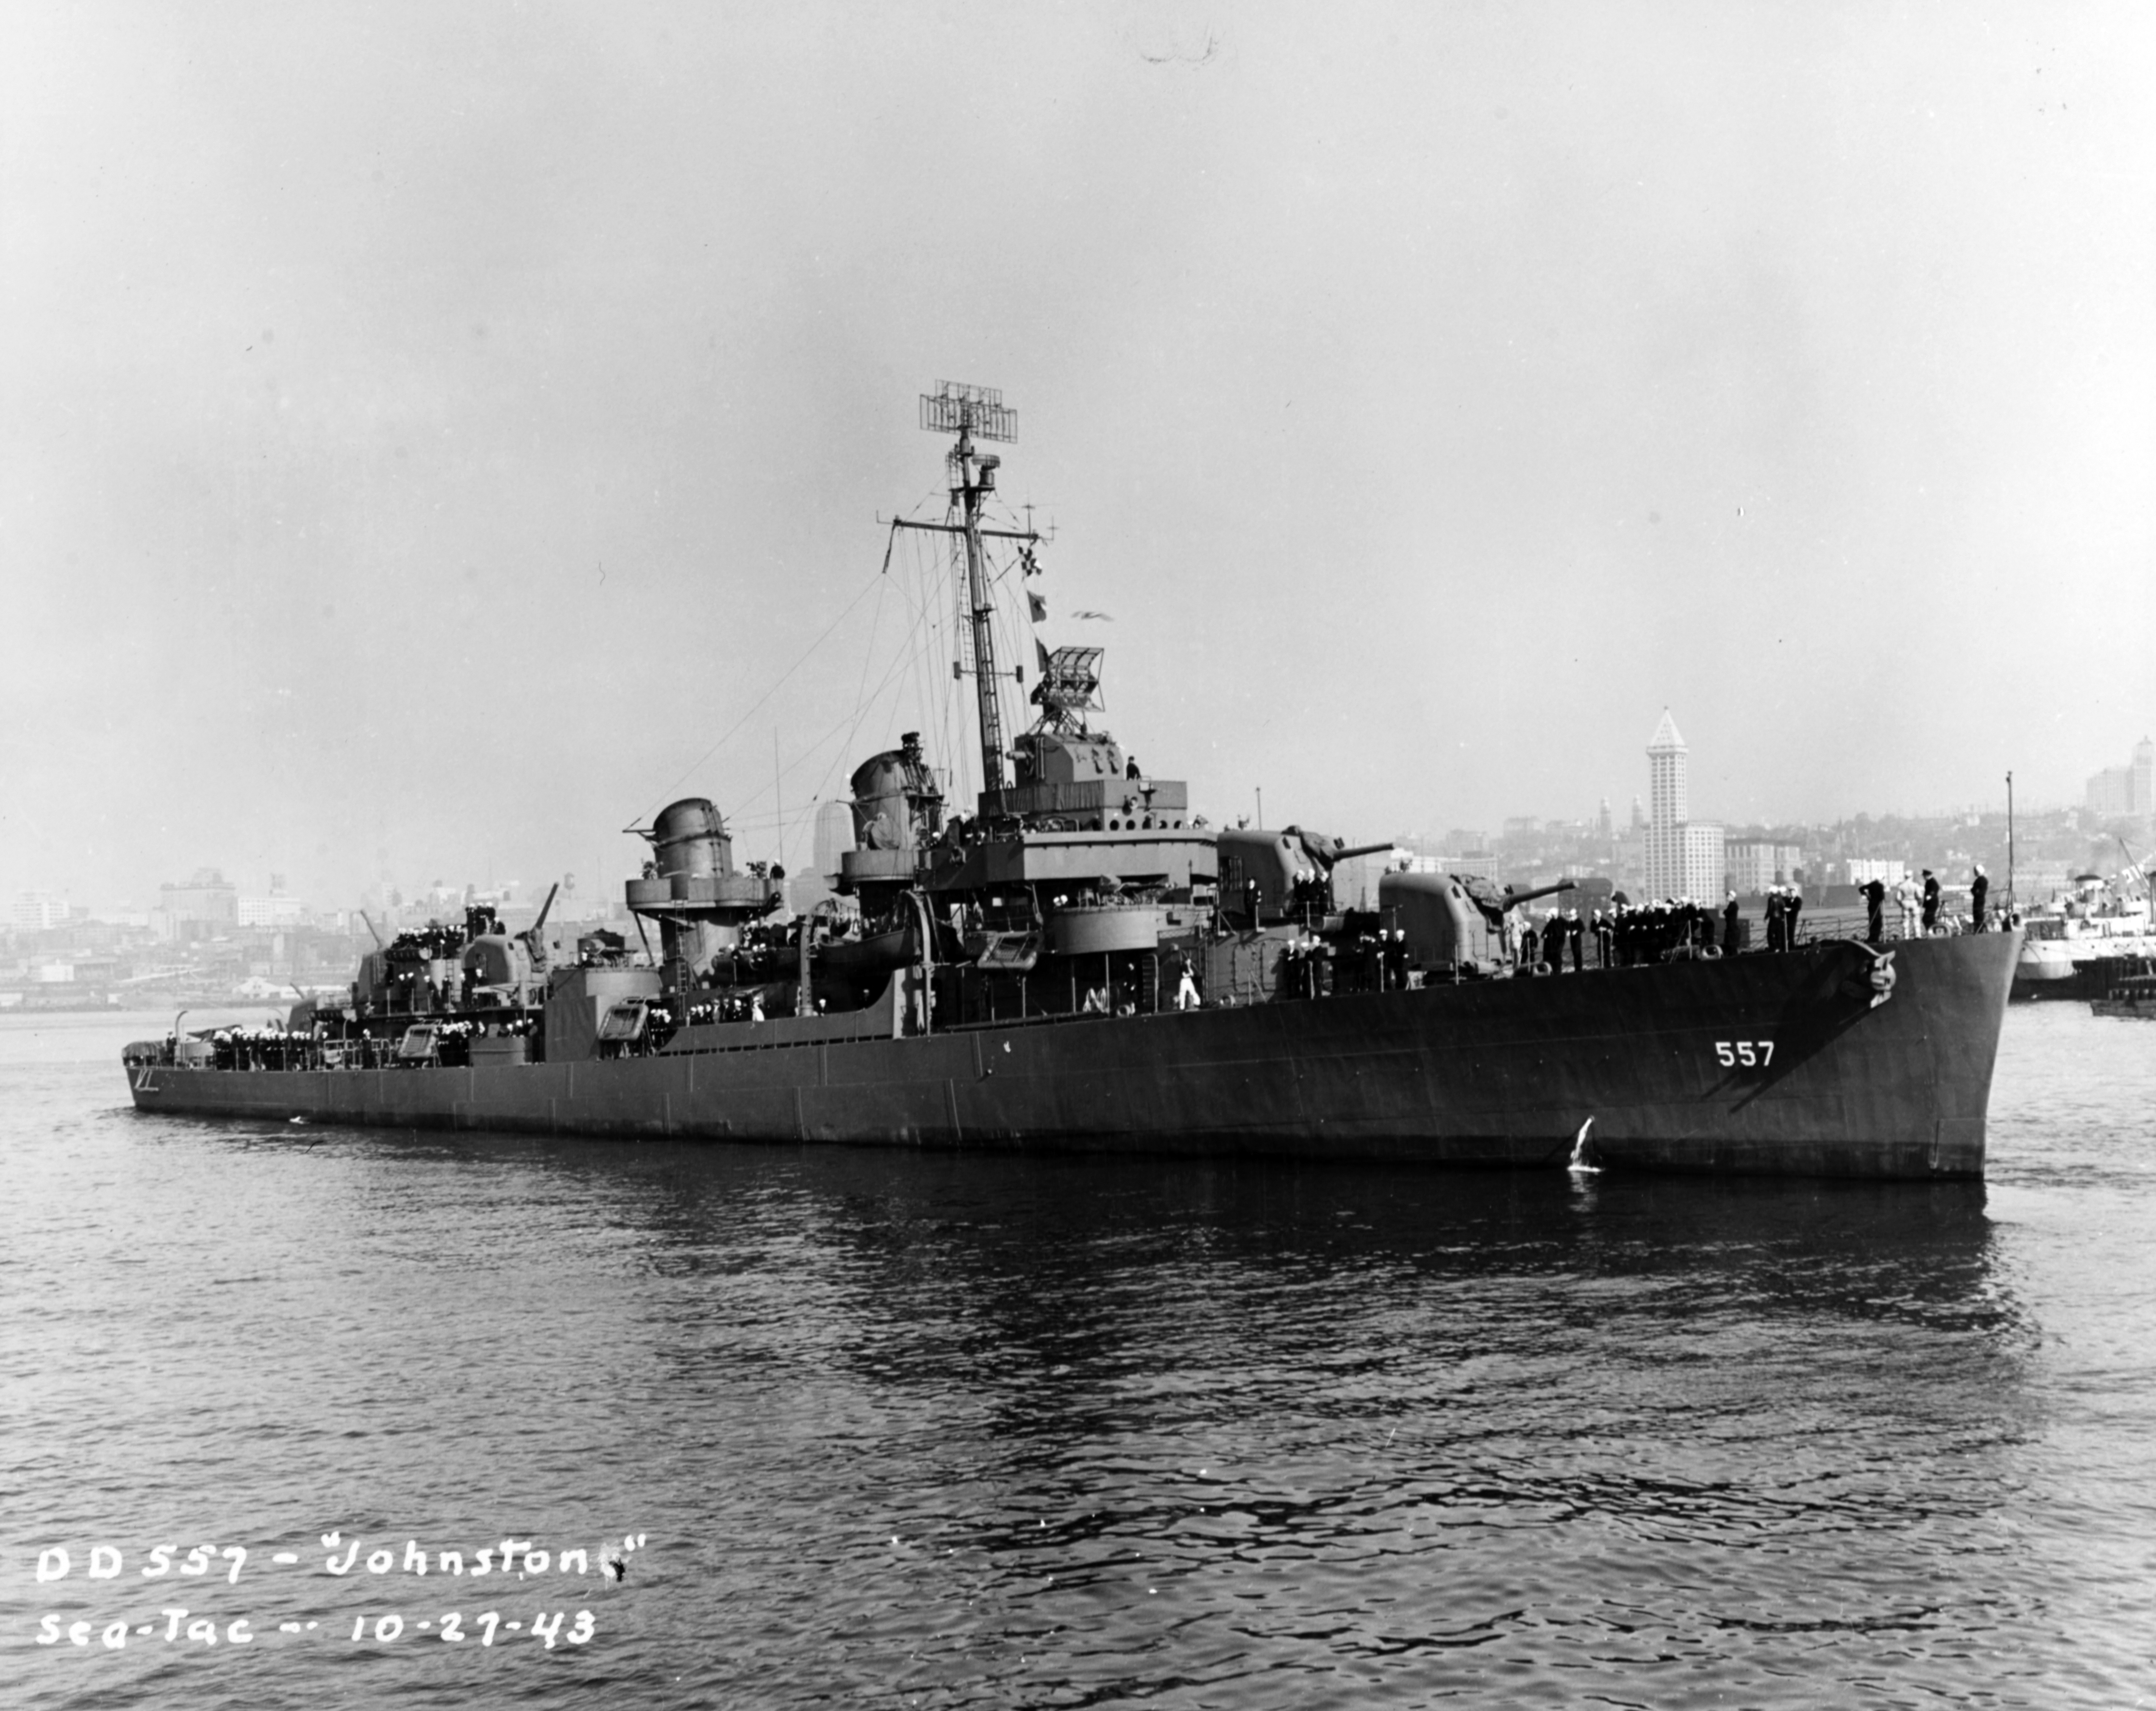 The USS Johnston off the coast of Washington, October 27, 1943. (Naval History and Heritage Command)